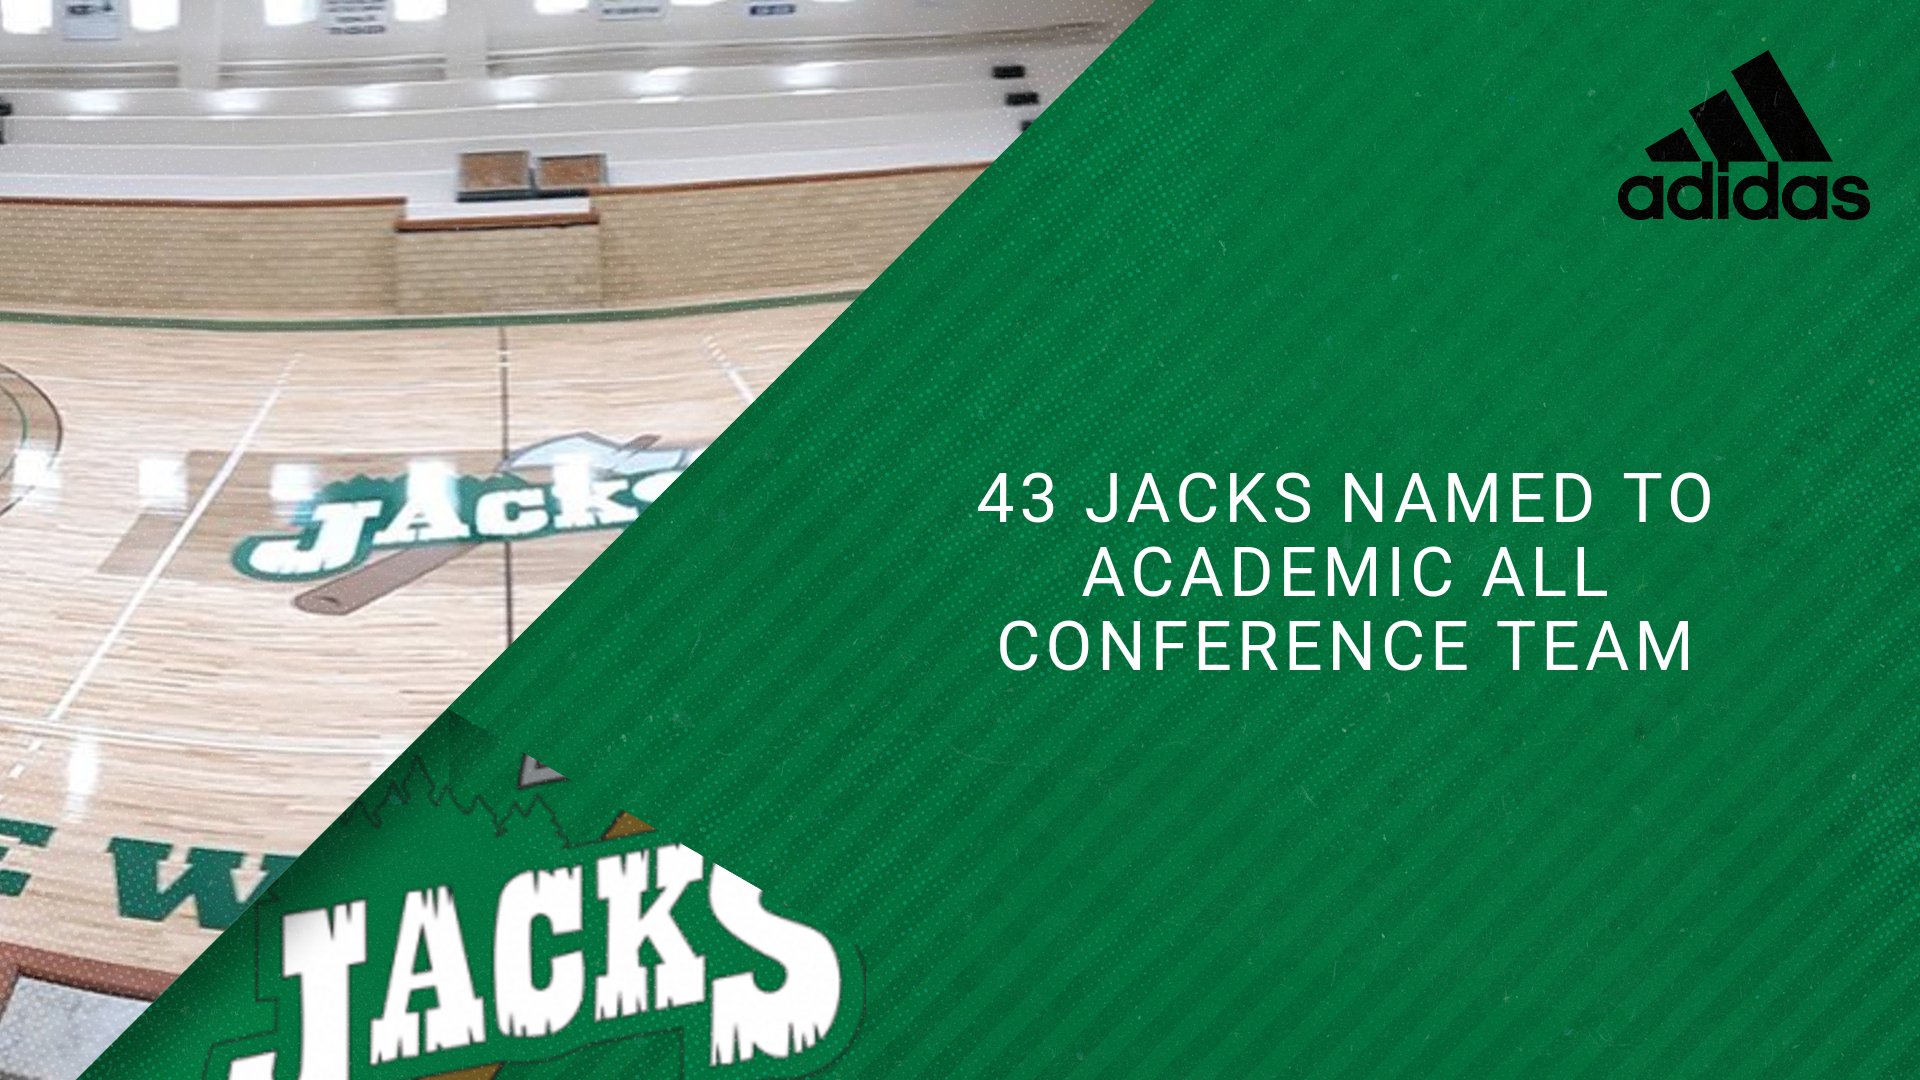 43 Jacks Named to Academic All-Conference Team